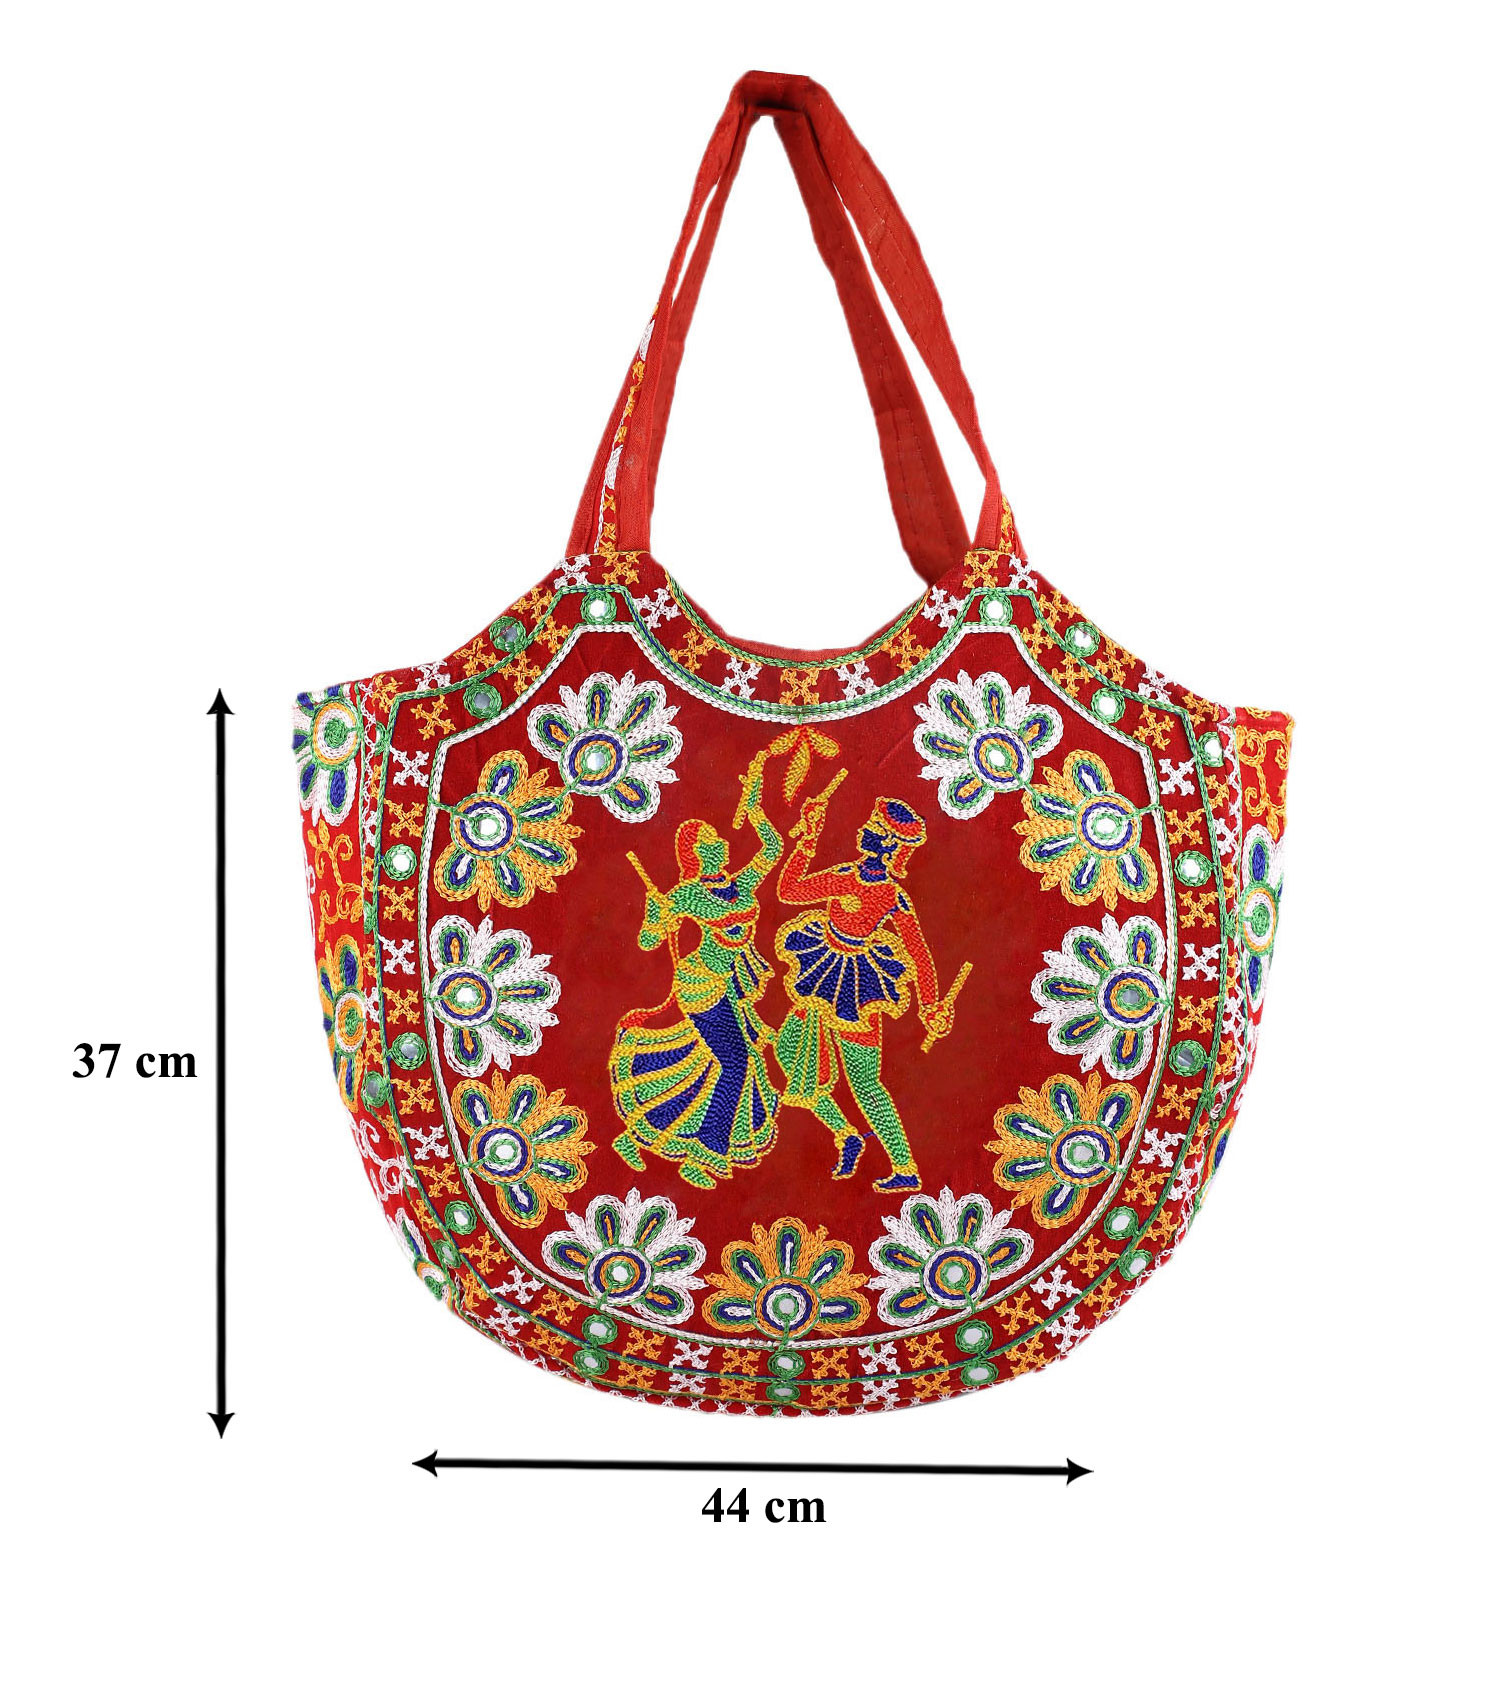 Kuber Industries Multiuses Velvet Rajasthani Embroidery Design Hand Bag/Tote Bag For Daily Trips, Travel, Office (Red)